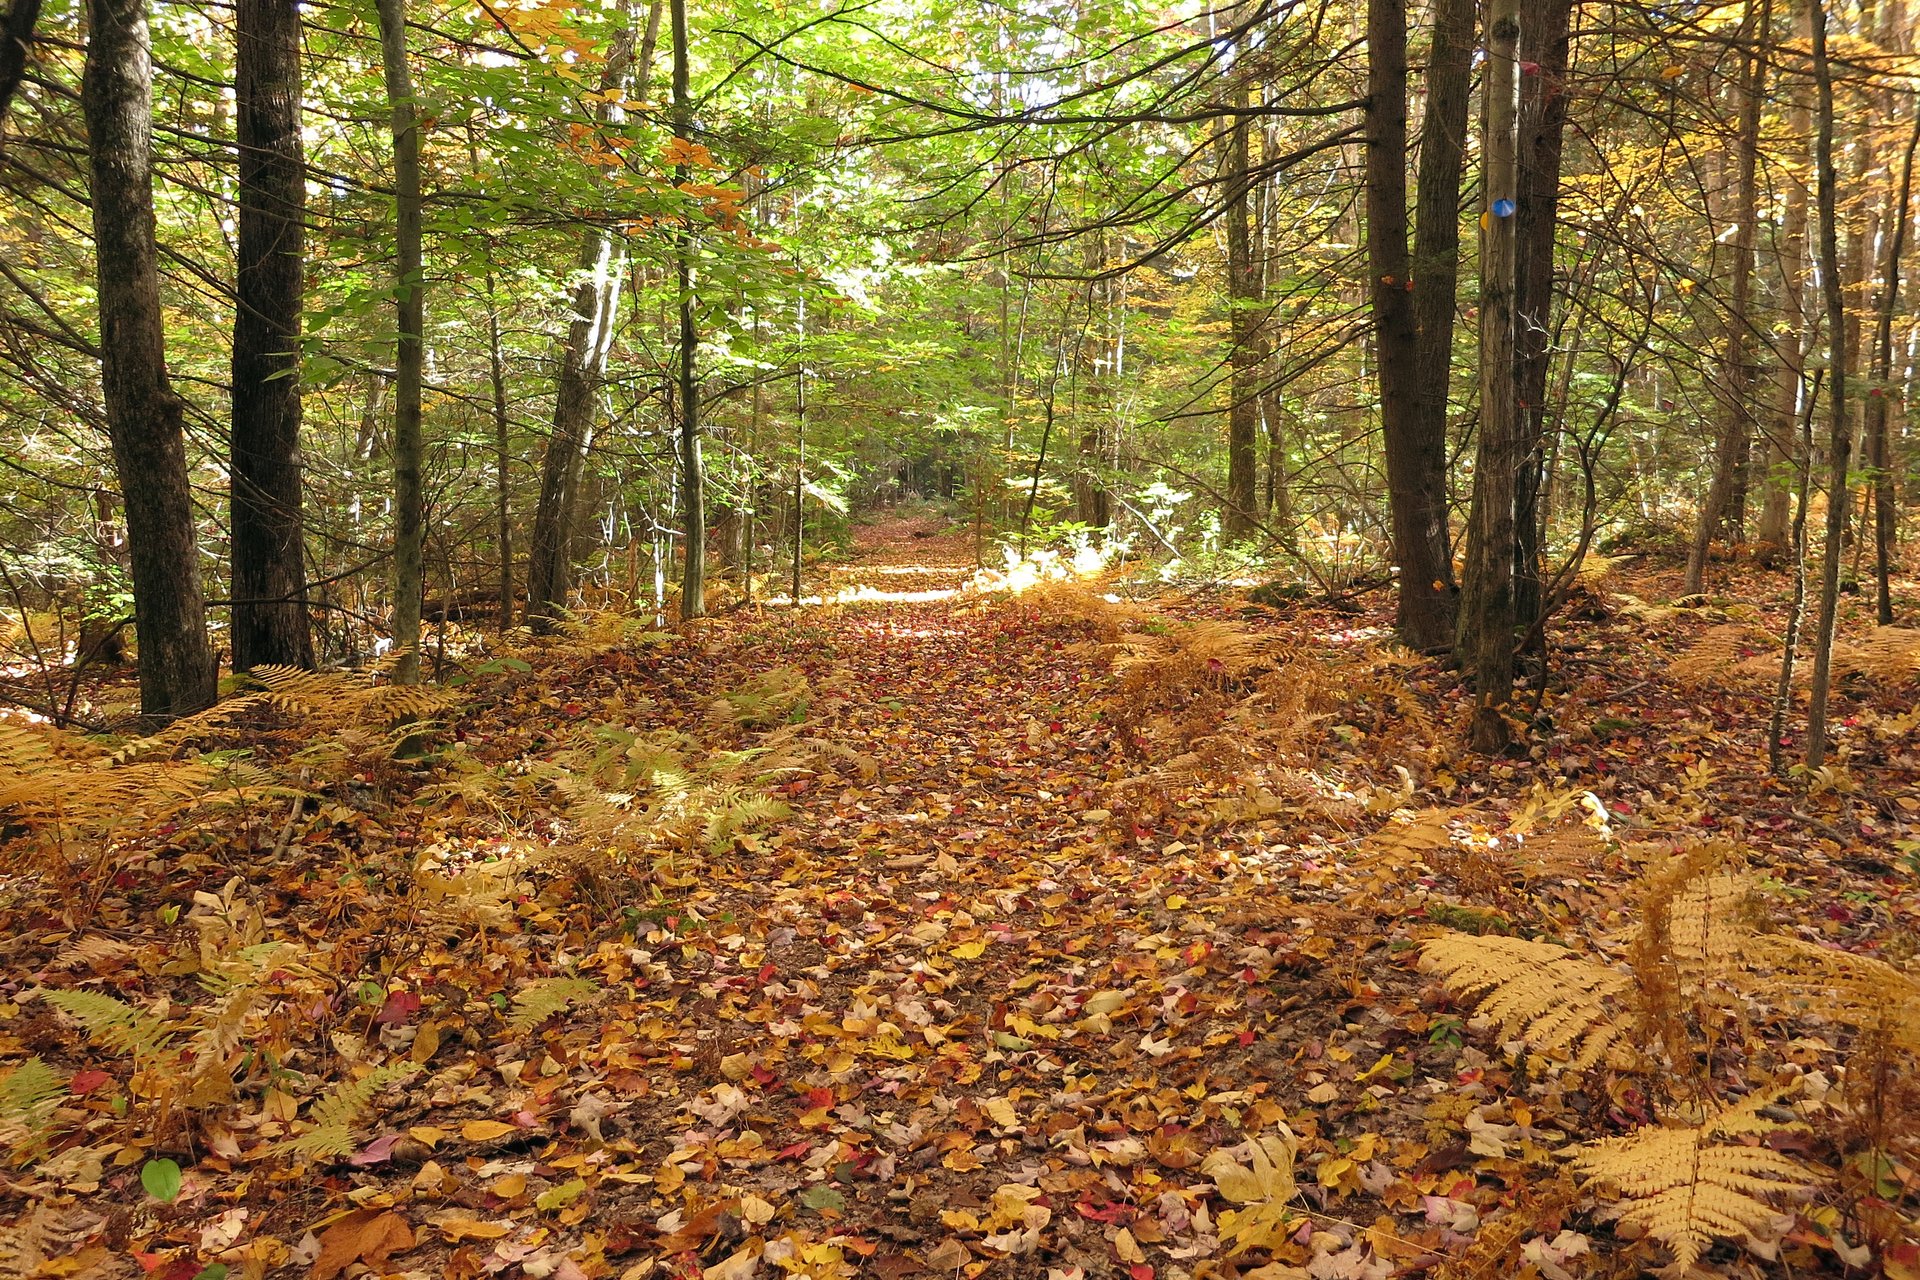 wide trail with leaves on ground and yellow ferns and foliage